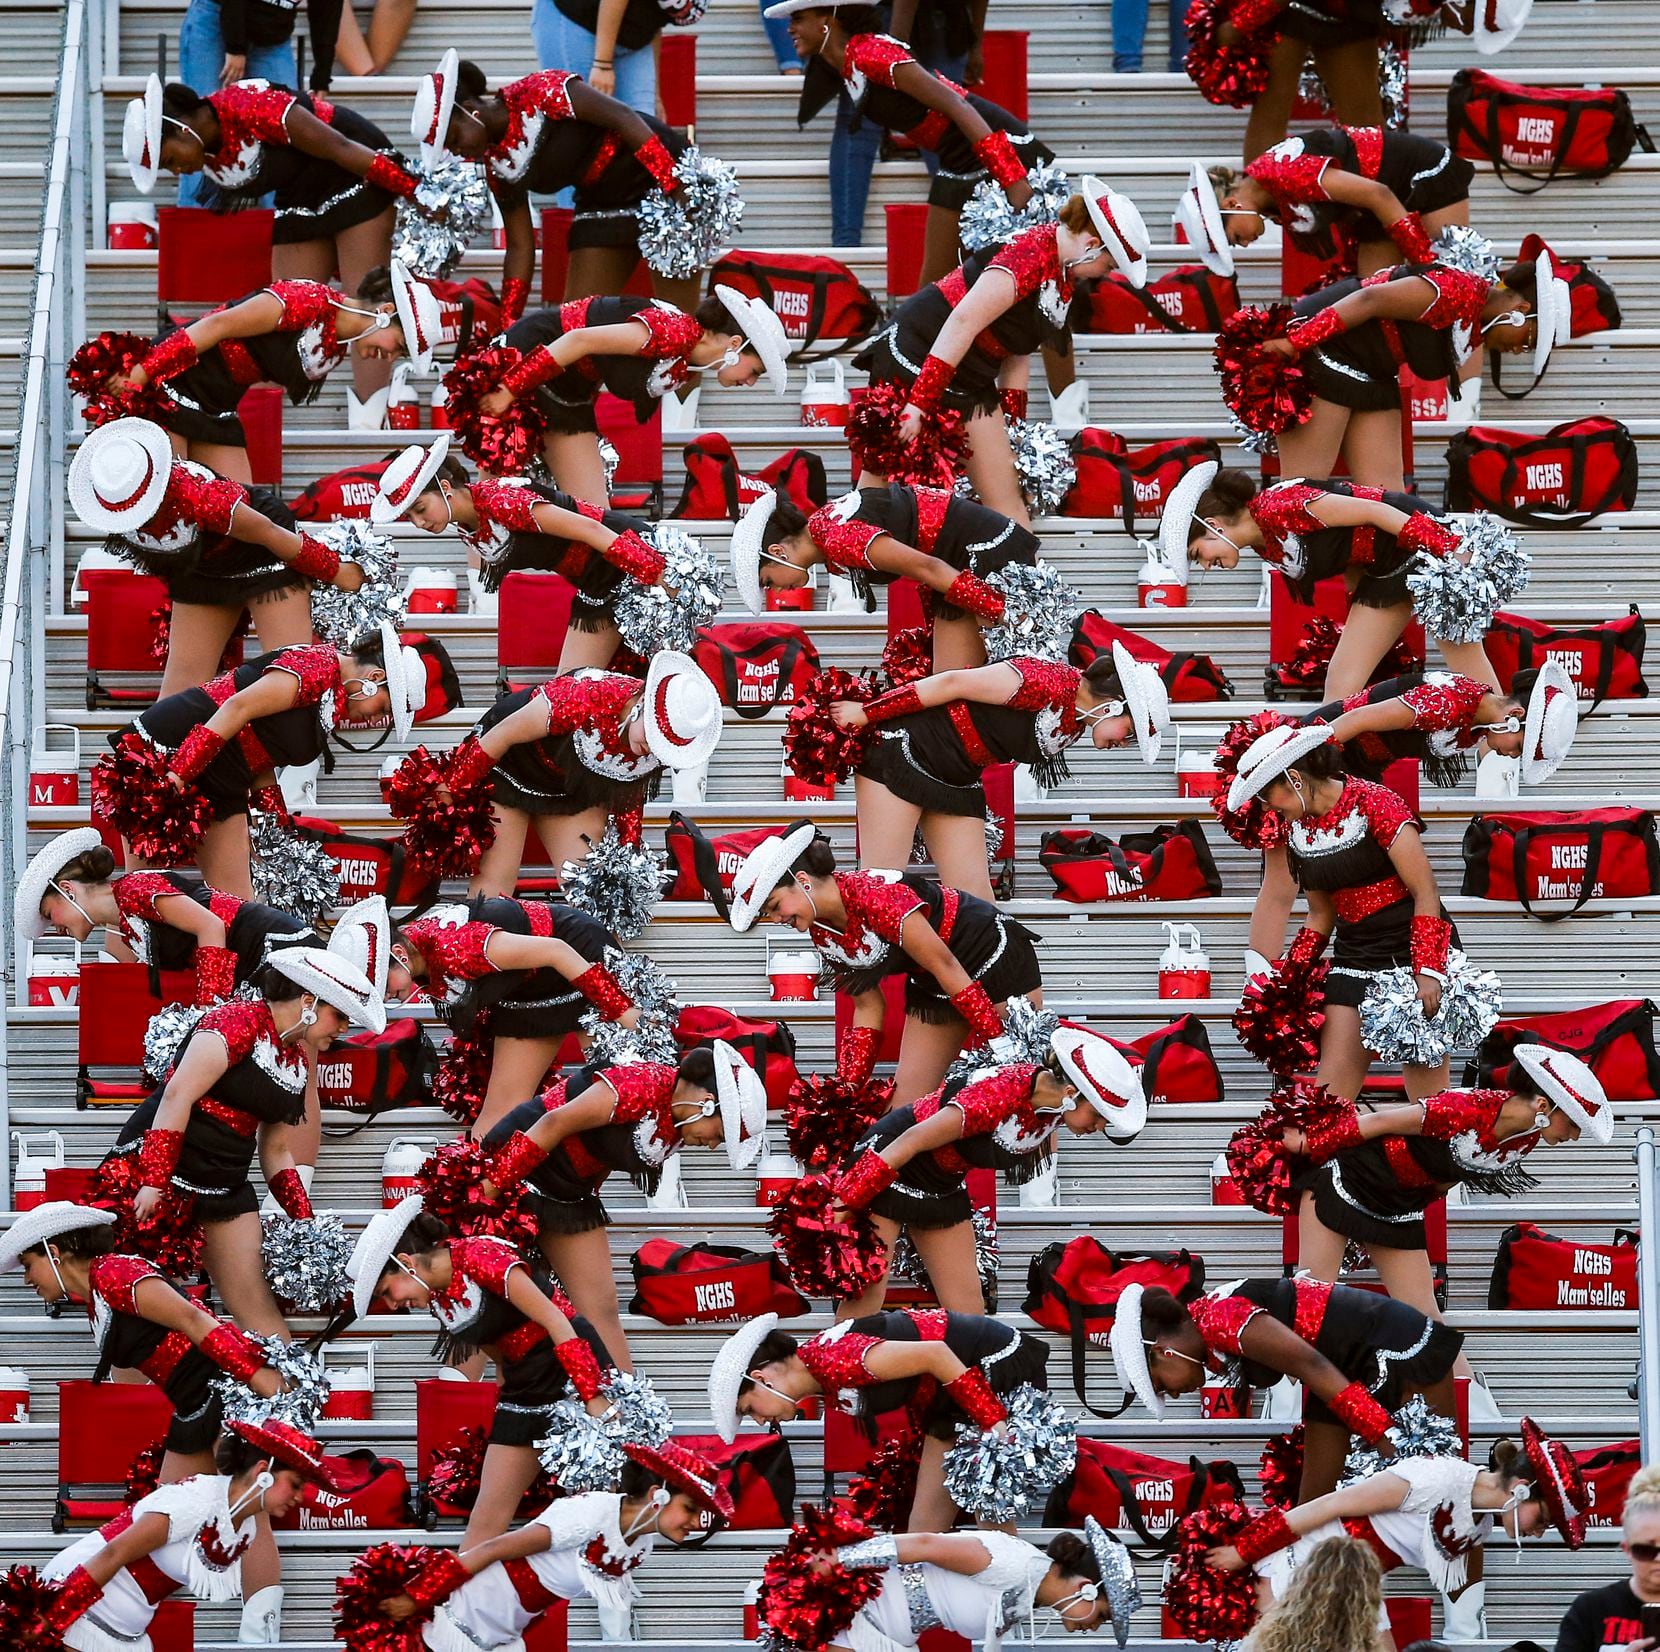 North Garland High School’s Mam’selles drill team performed in the stands during a game at Williams Stadium in Garland.